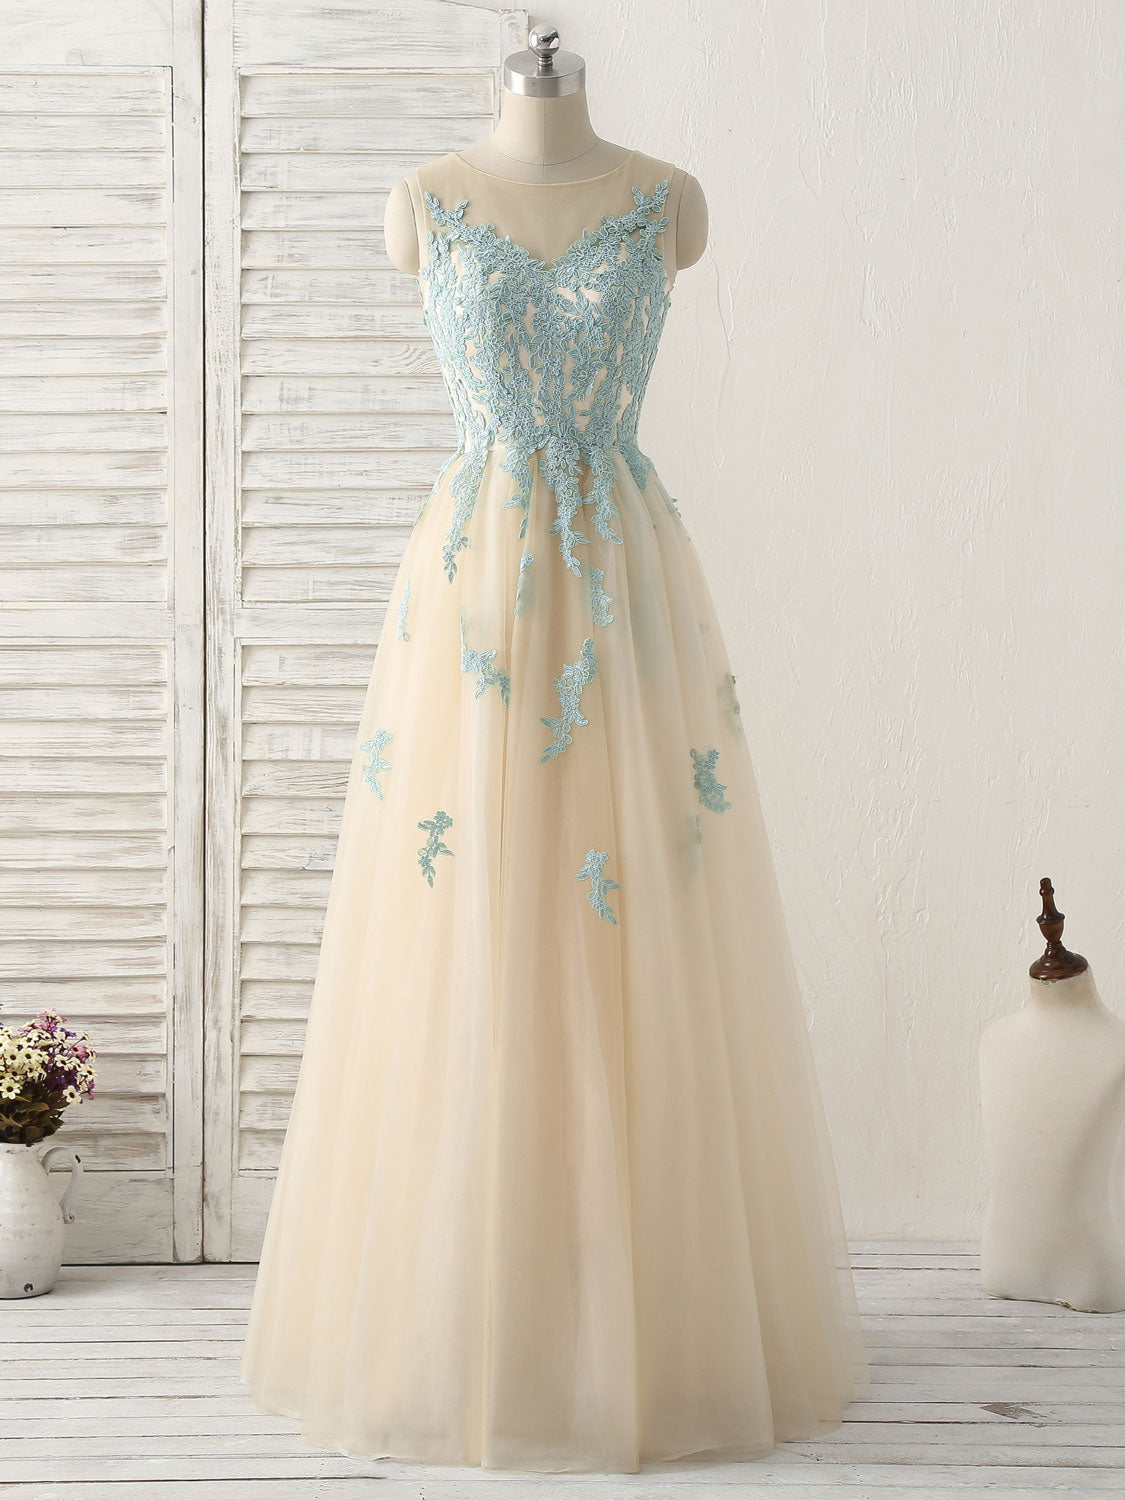 Cute Champagne Lace Long Prom Dress, A Line Tulle Bridesmaid Dress ...